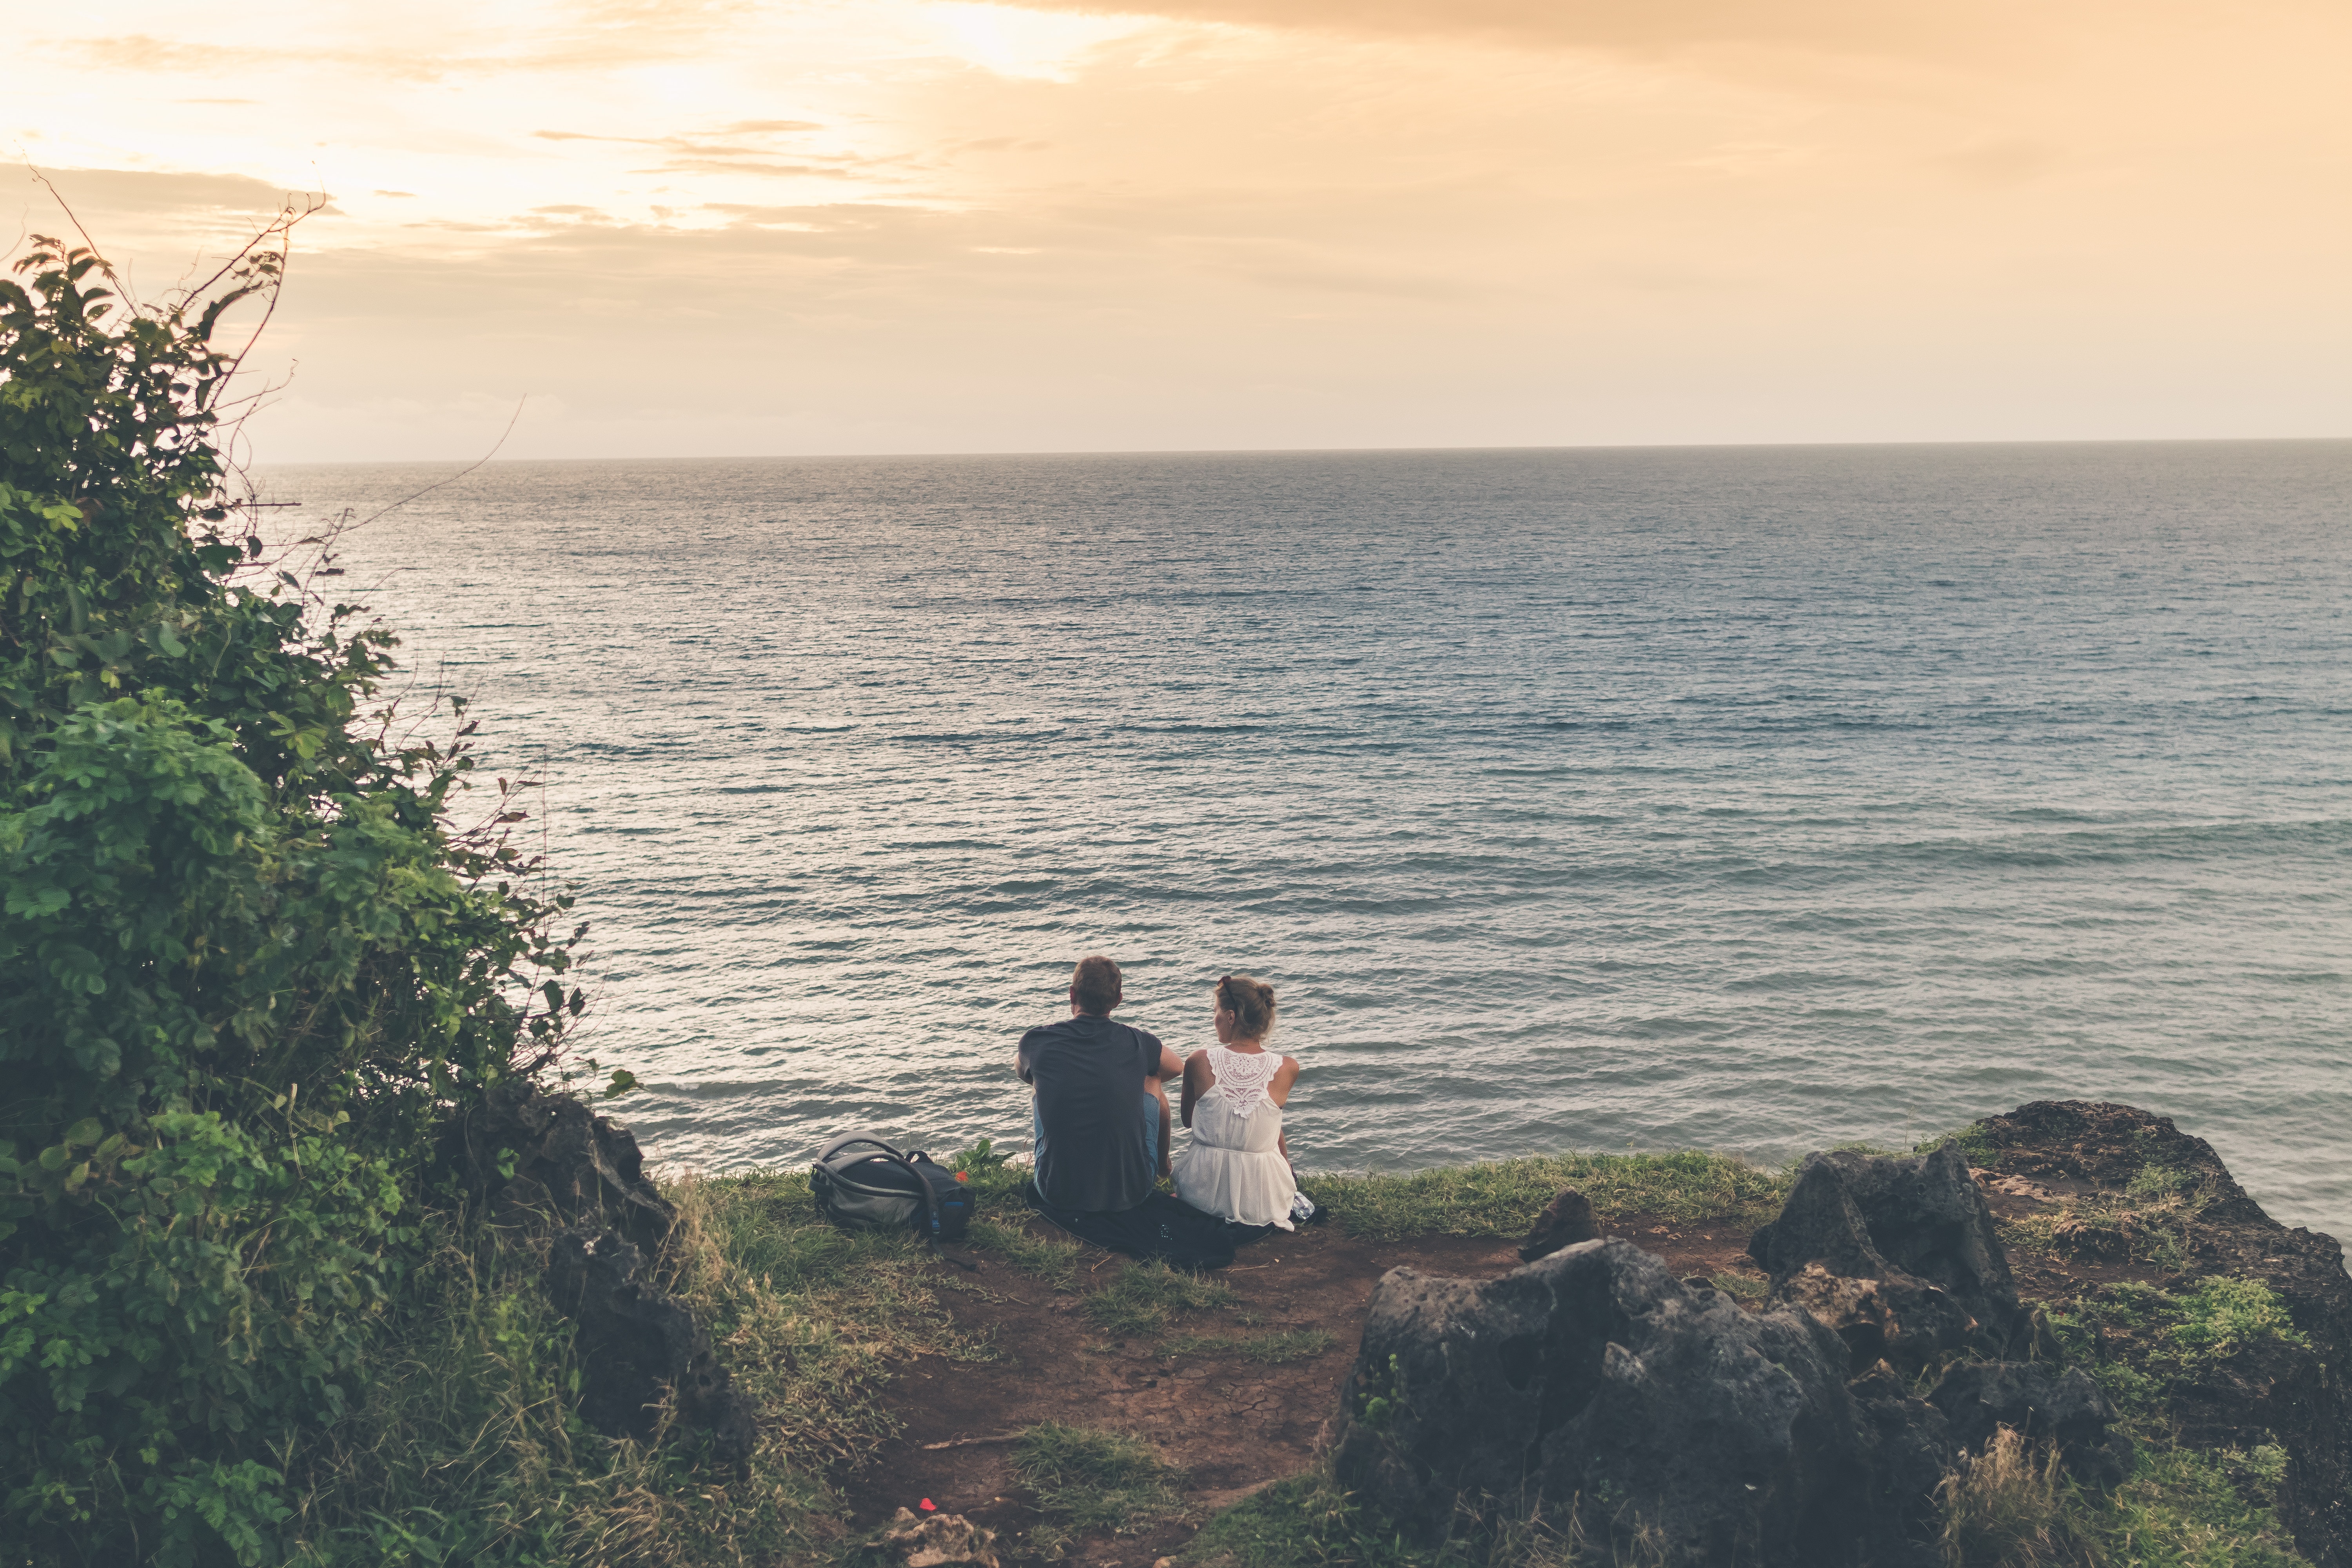 Man and woman sitting near body of water photo